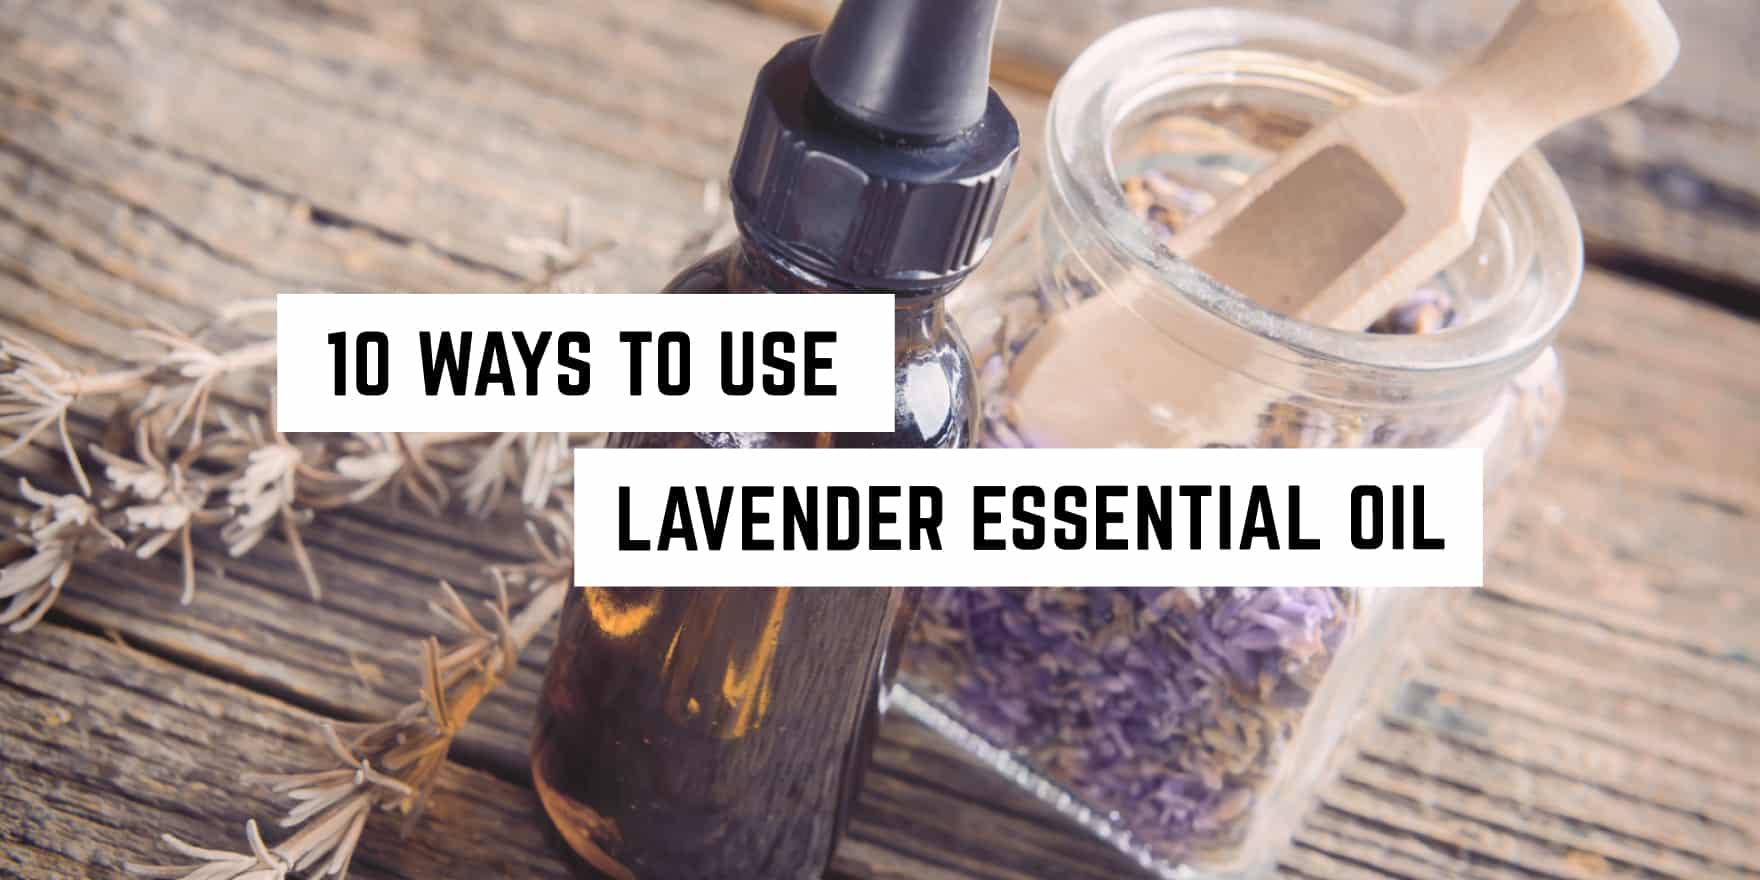 A guide to metaphysical aromatherapy: 10 creative uses for lavender essential oil.